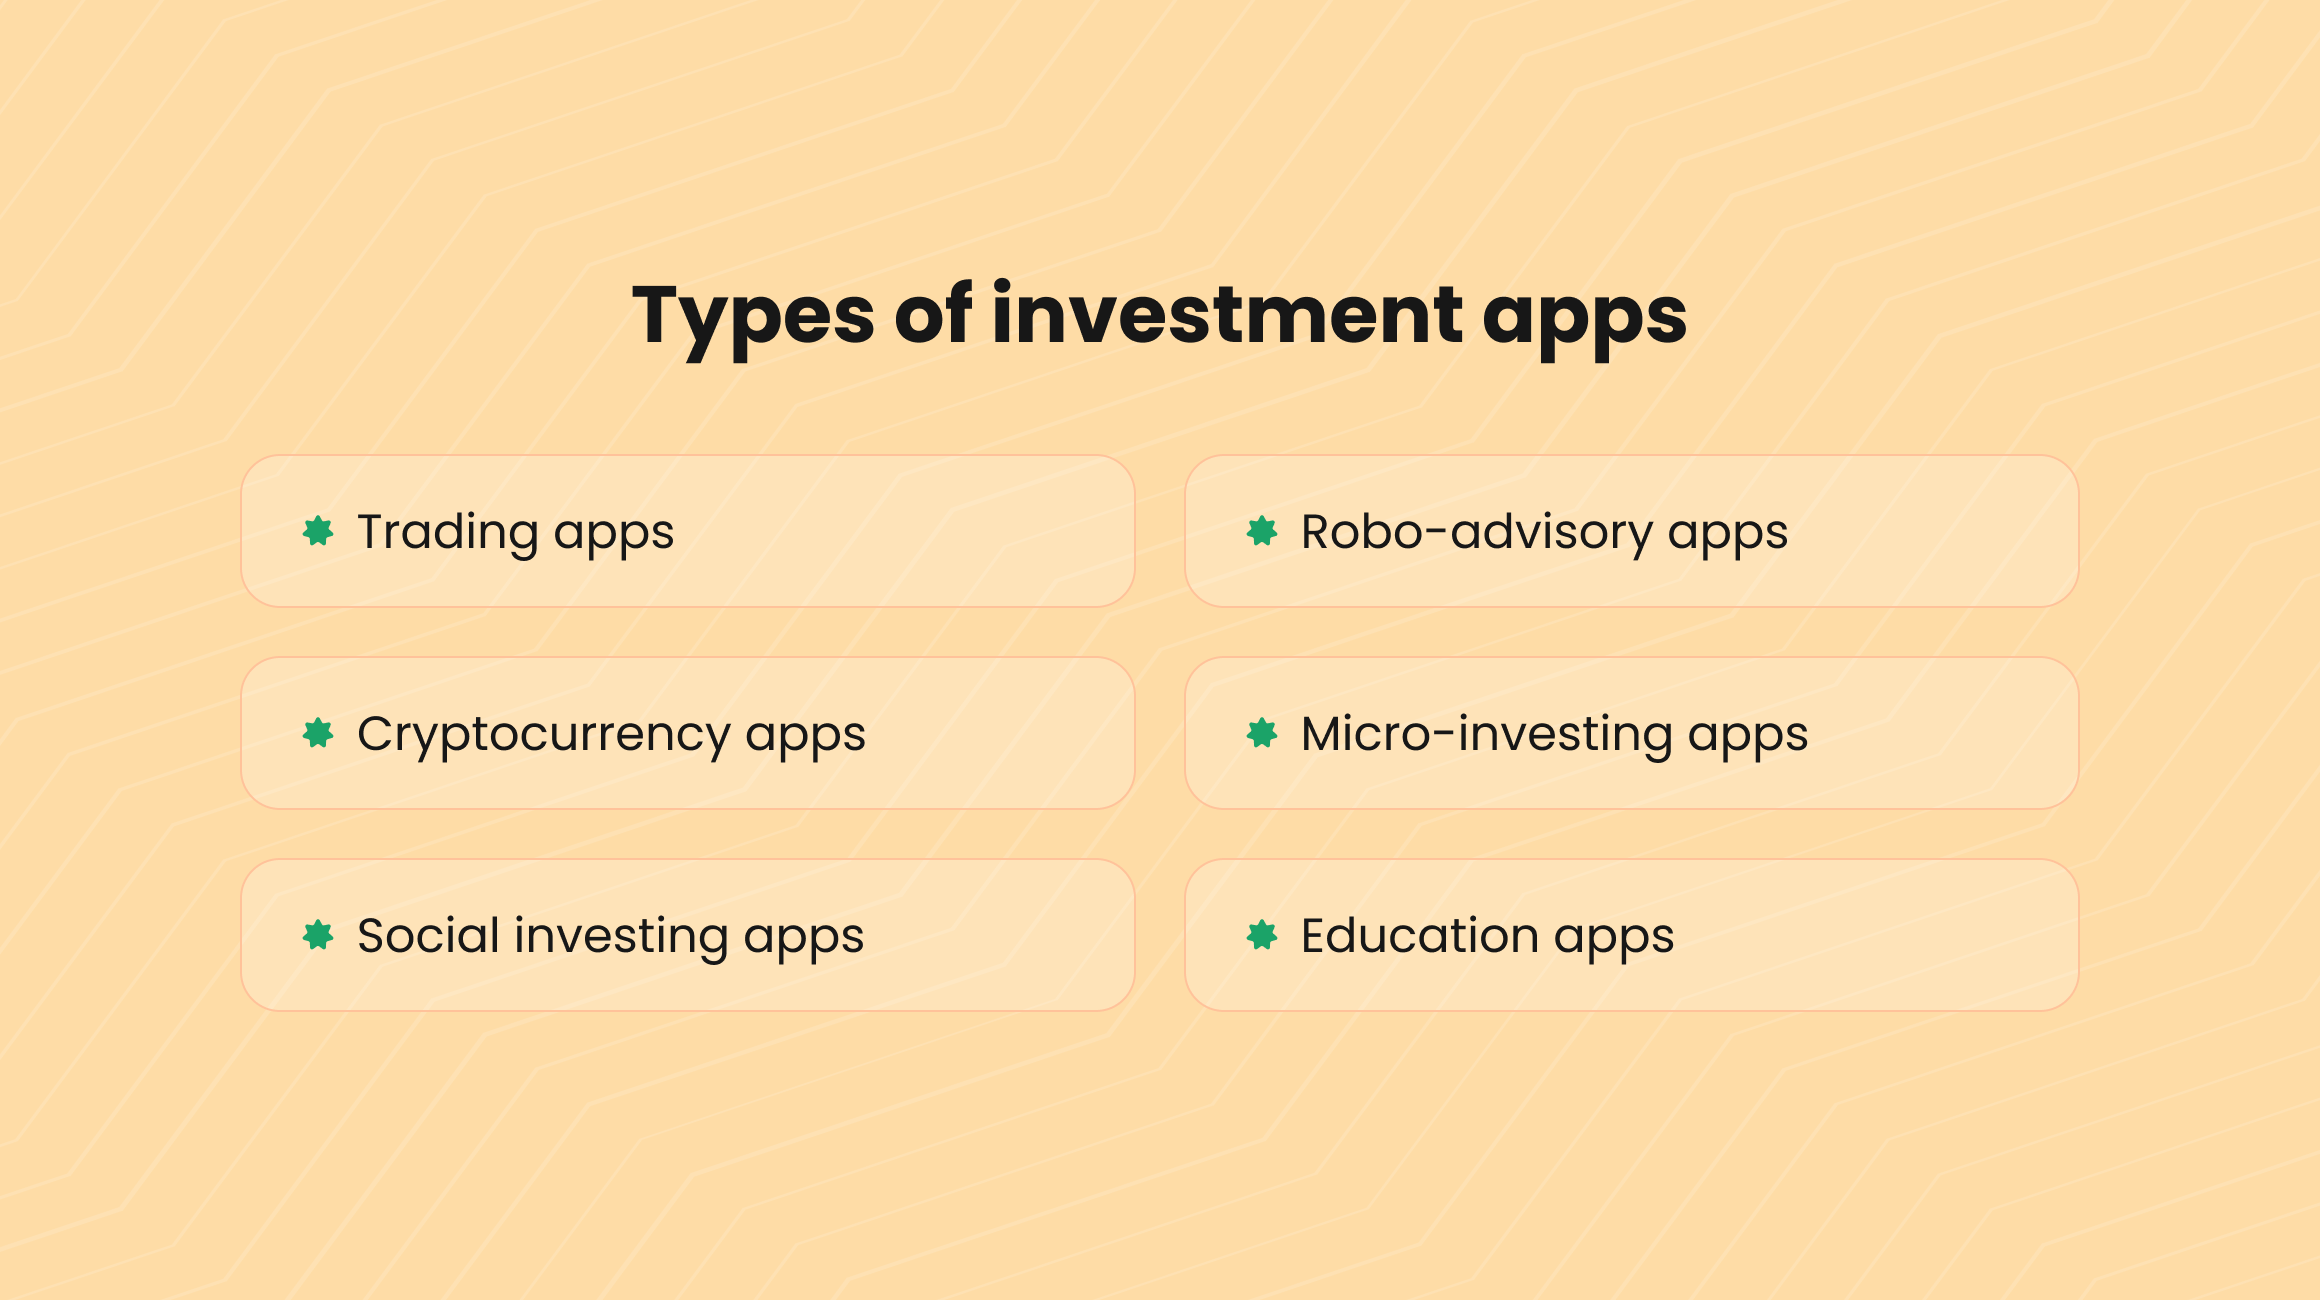 Types of investment apps